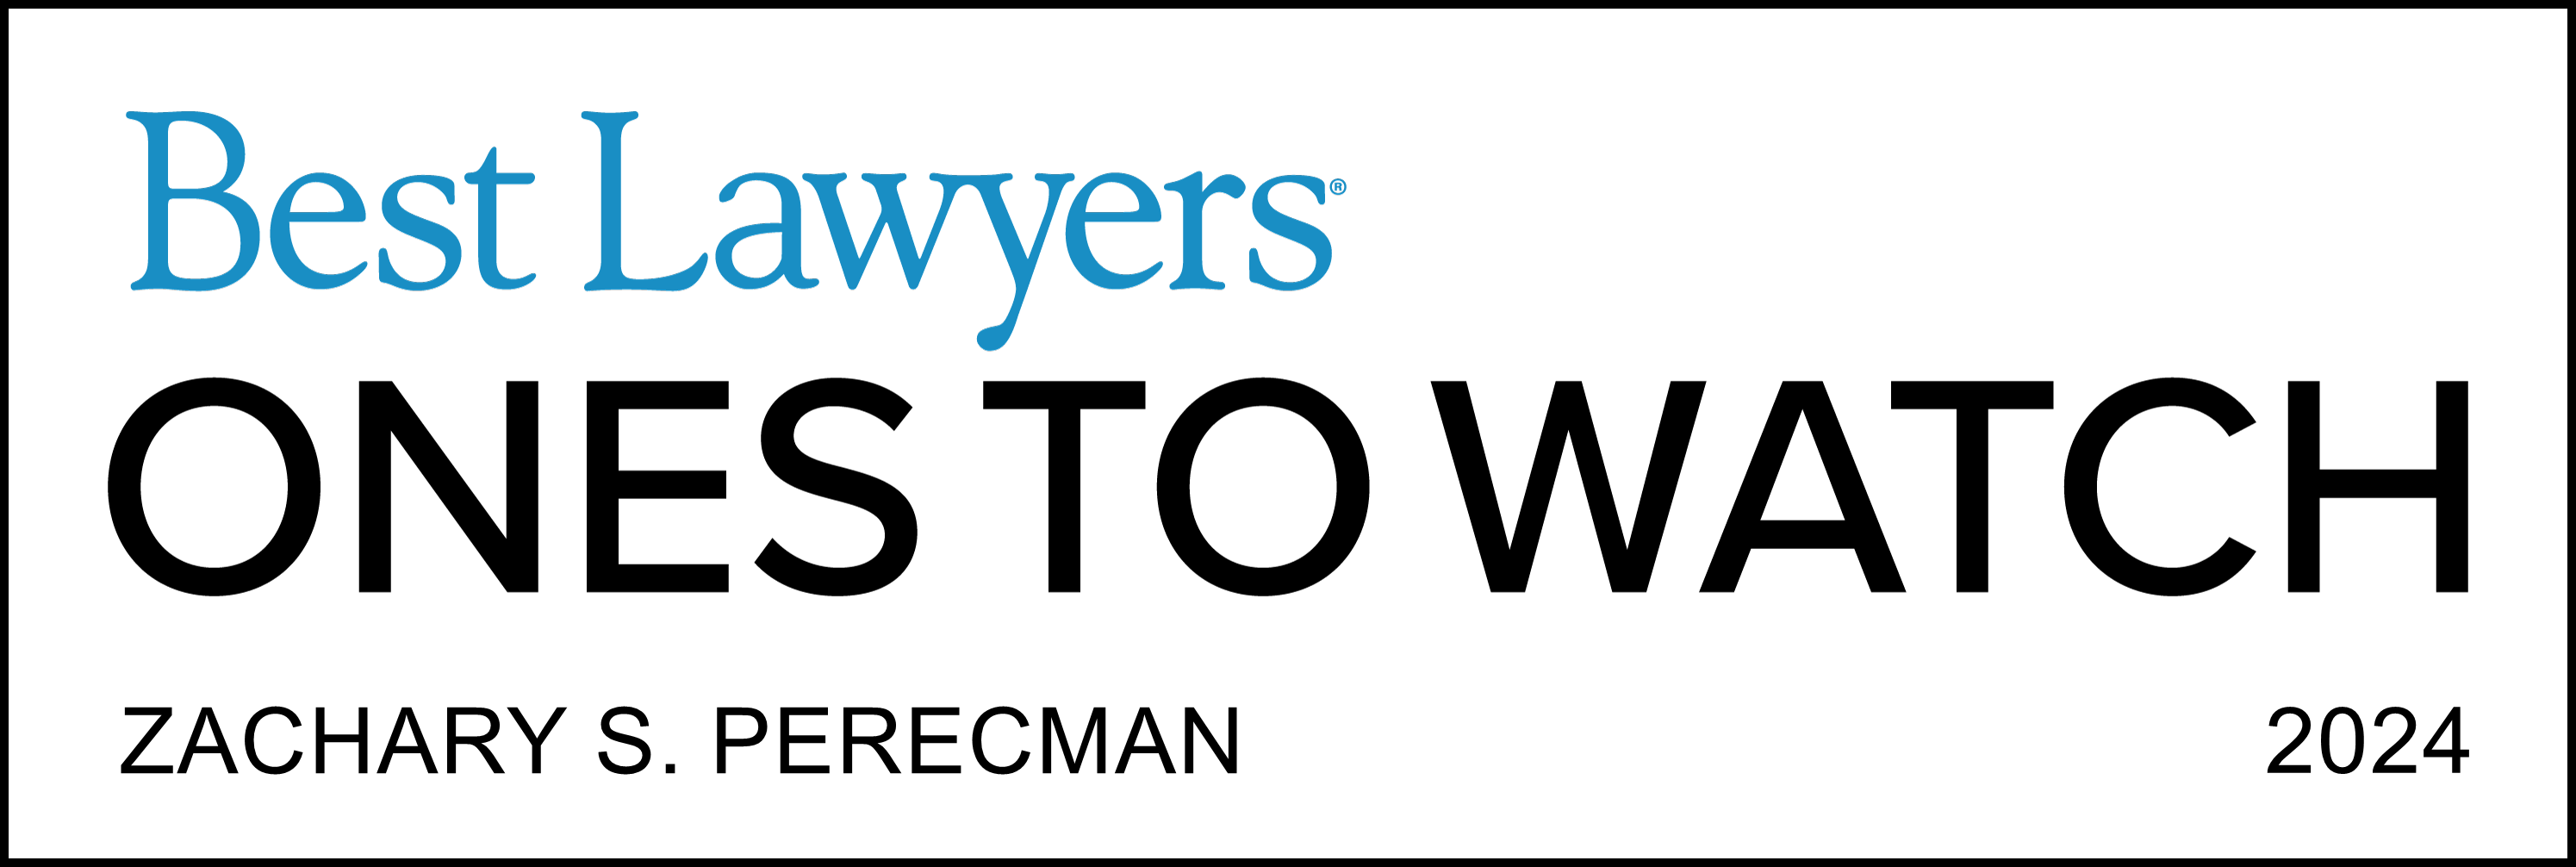 Best Lawyers: Ones to Watch 2024